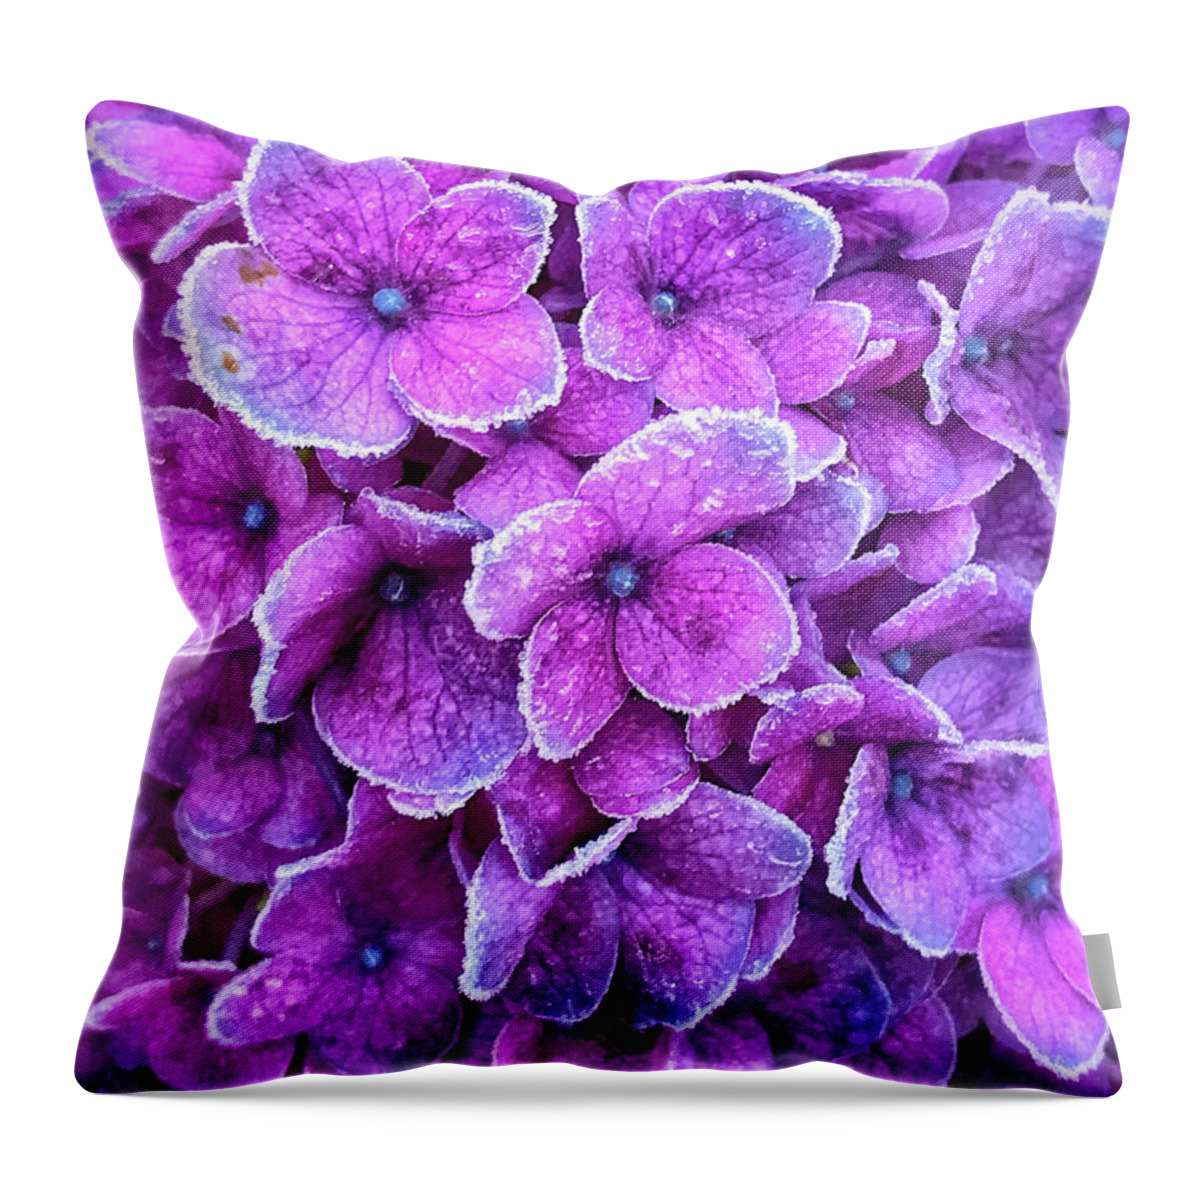 Delphinium Throw Pillow featuring the photograph Lavender Ice by Jill Love